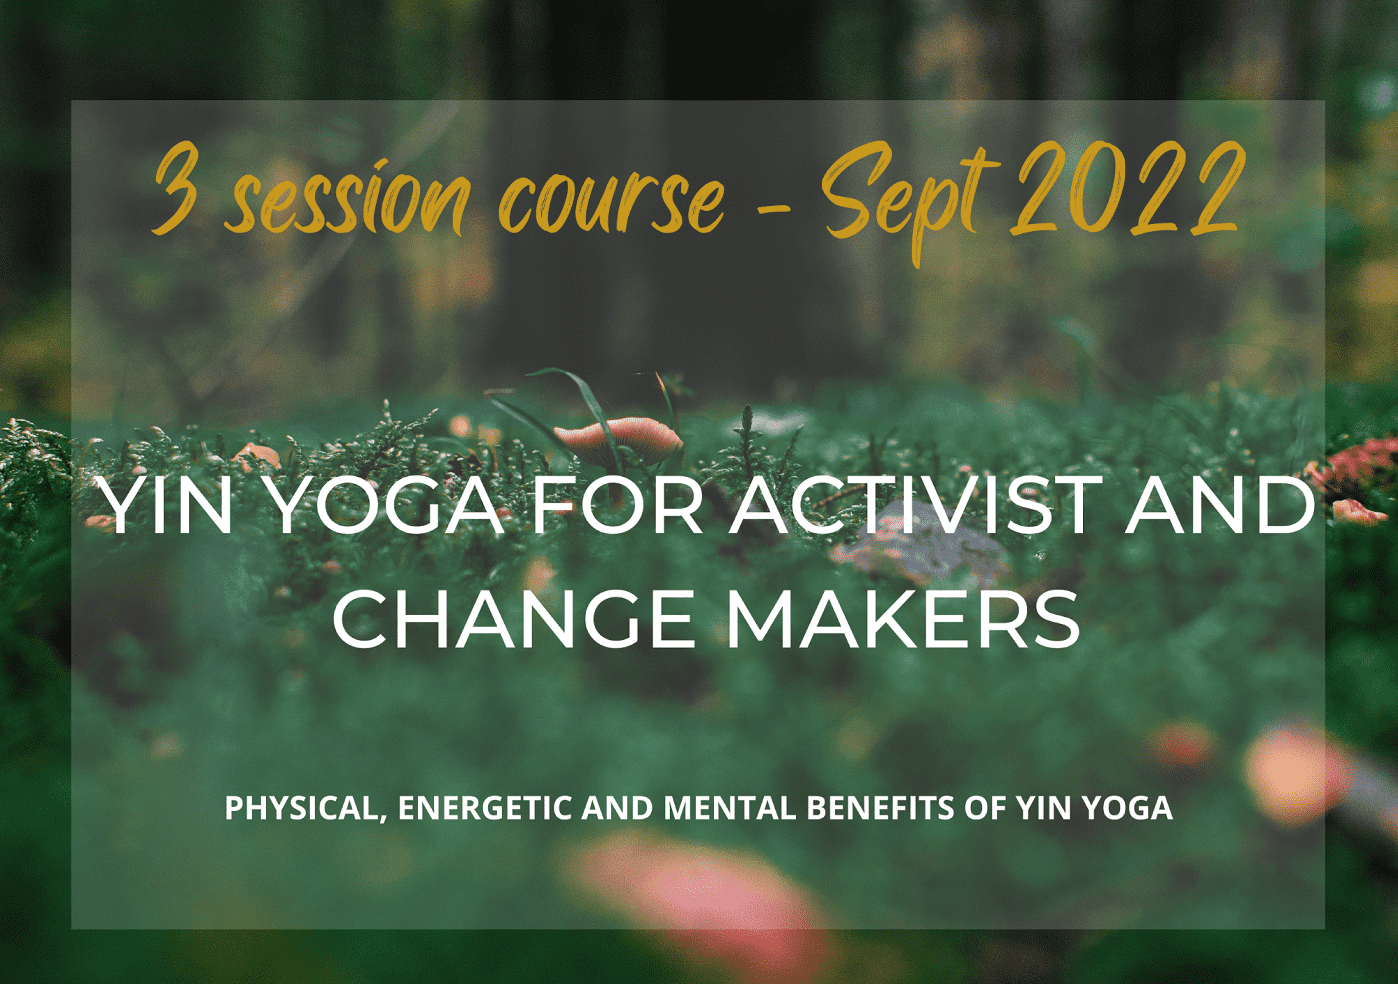 Yin yoga for activist and change makers